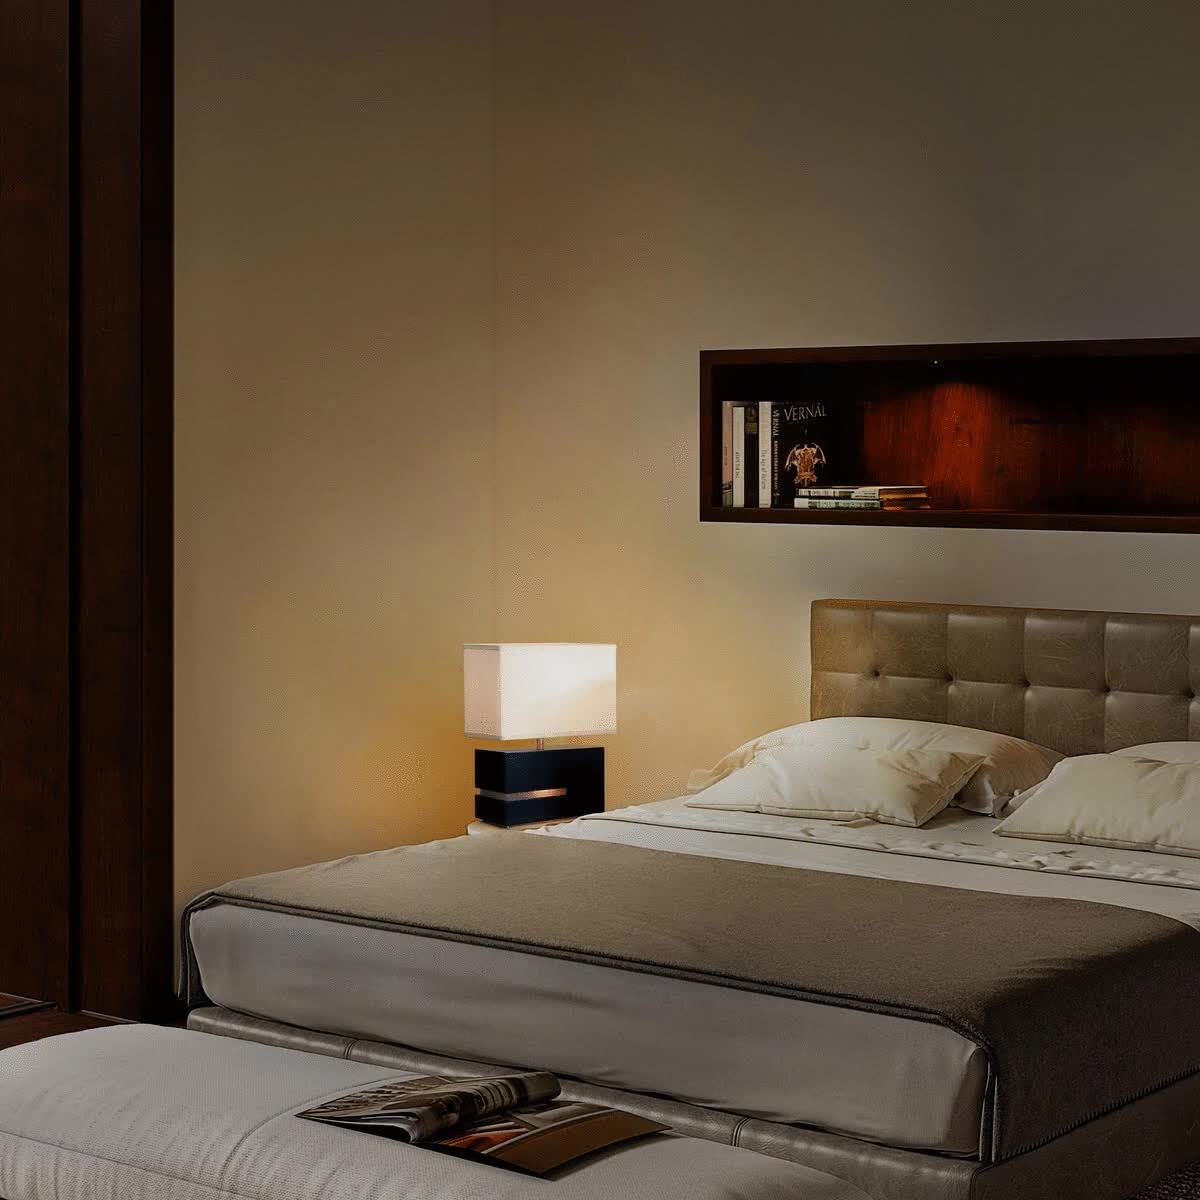 Zen Reclining Table Lamp with Nightlight - 19", Espresso Wood, Brushed Nickel, 4-way Switch